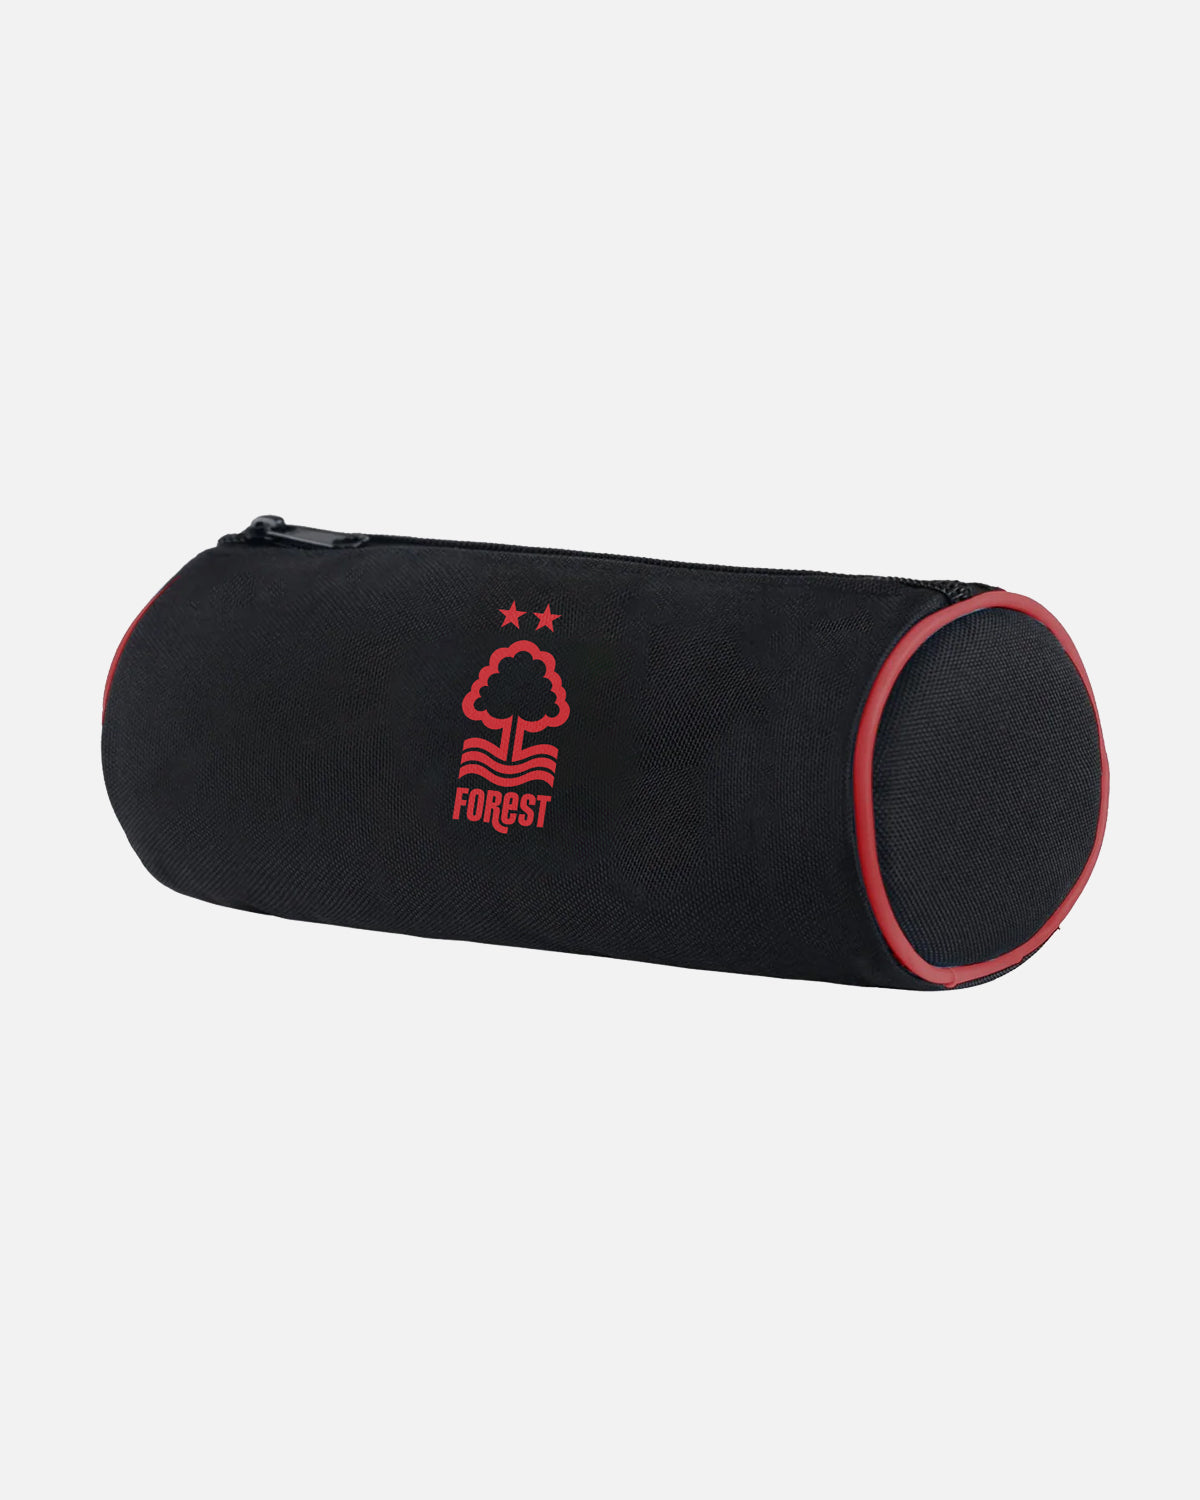 NFFC Recycled Pencil Case - Nottingham Forest FC